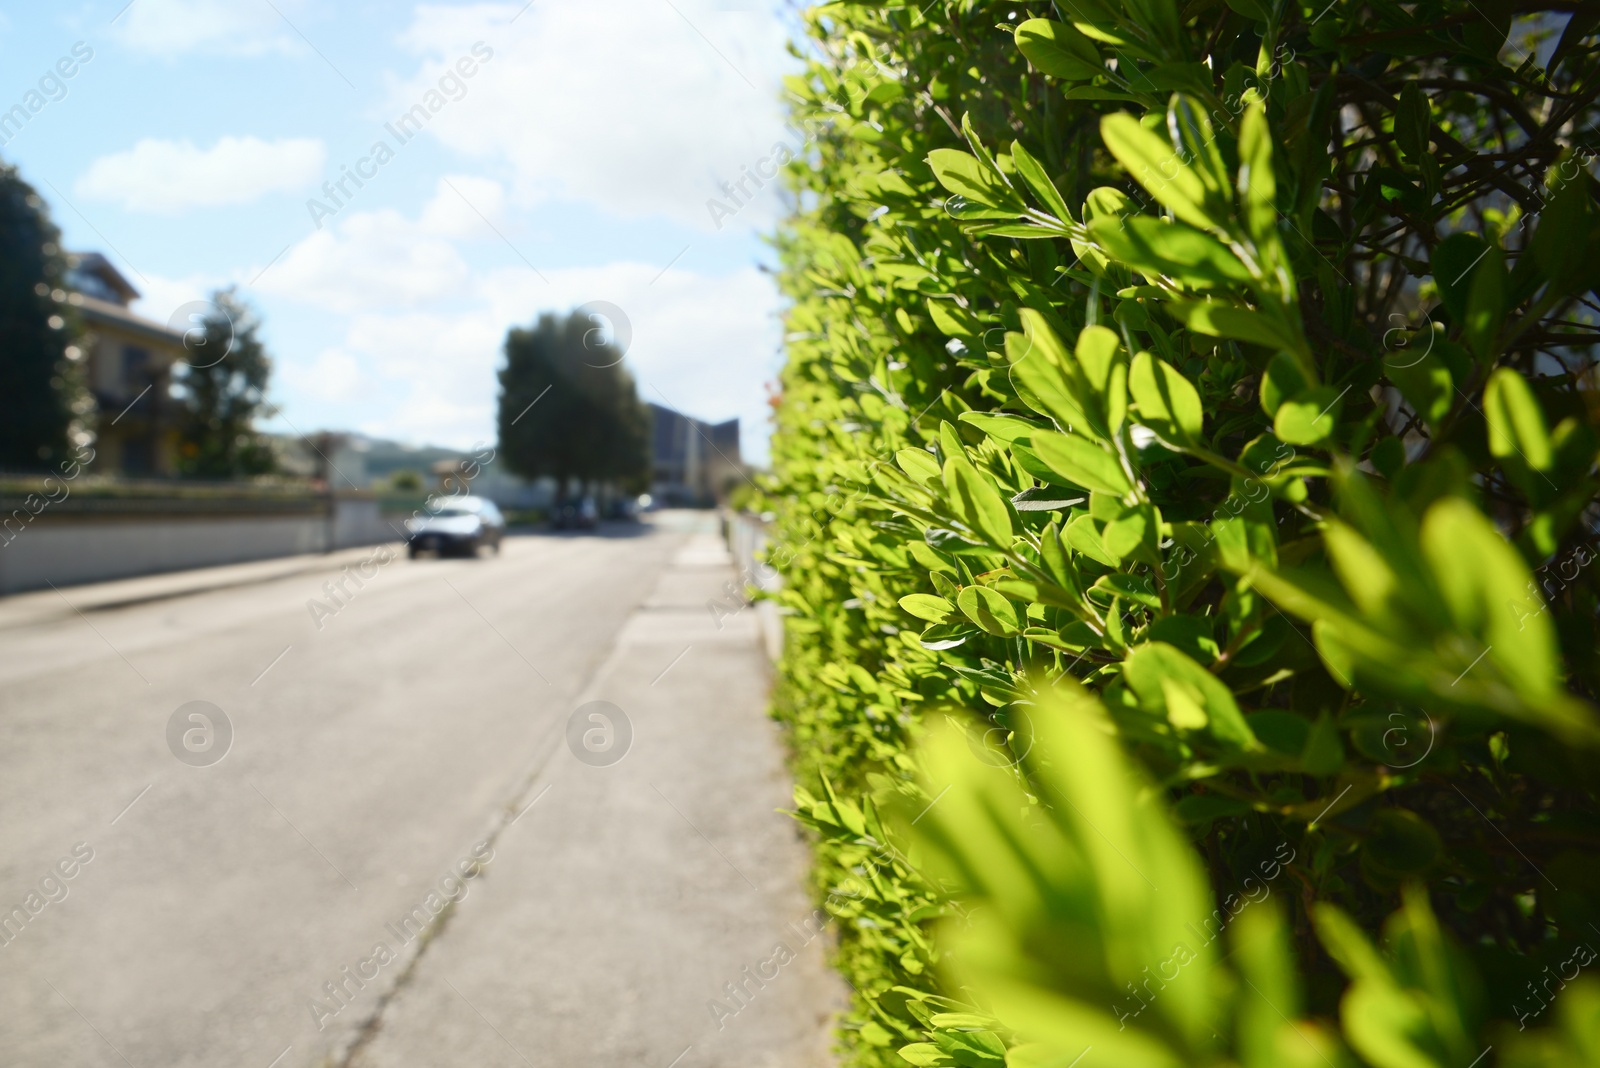 Photo of Closeup view of bush with green leaves on city street, space for text